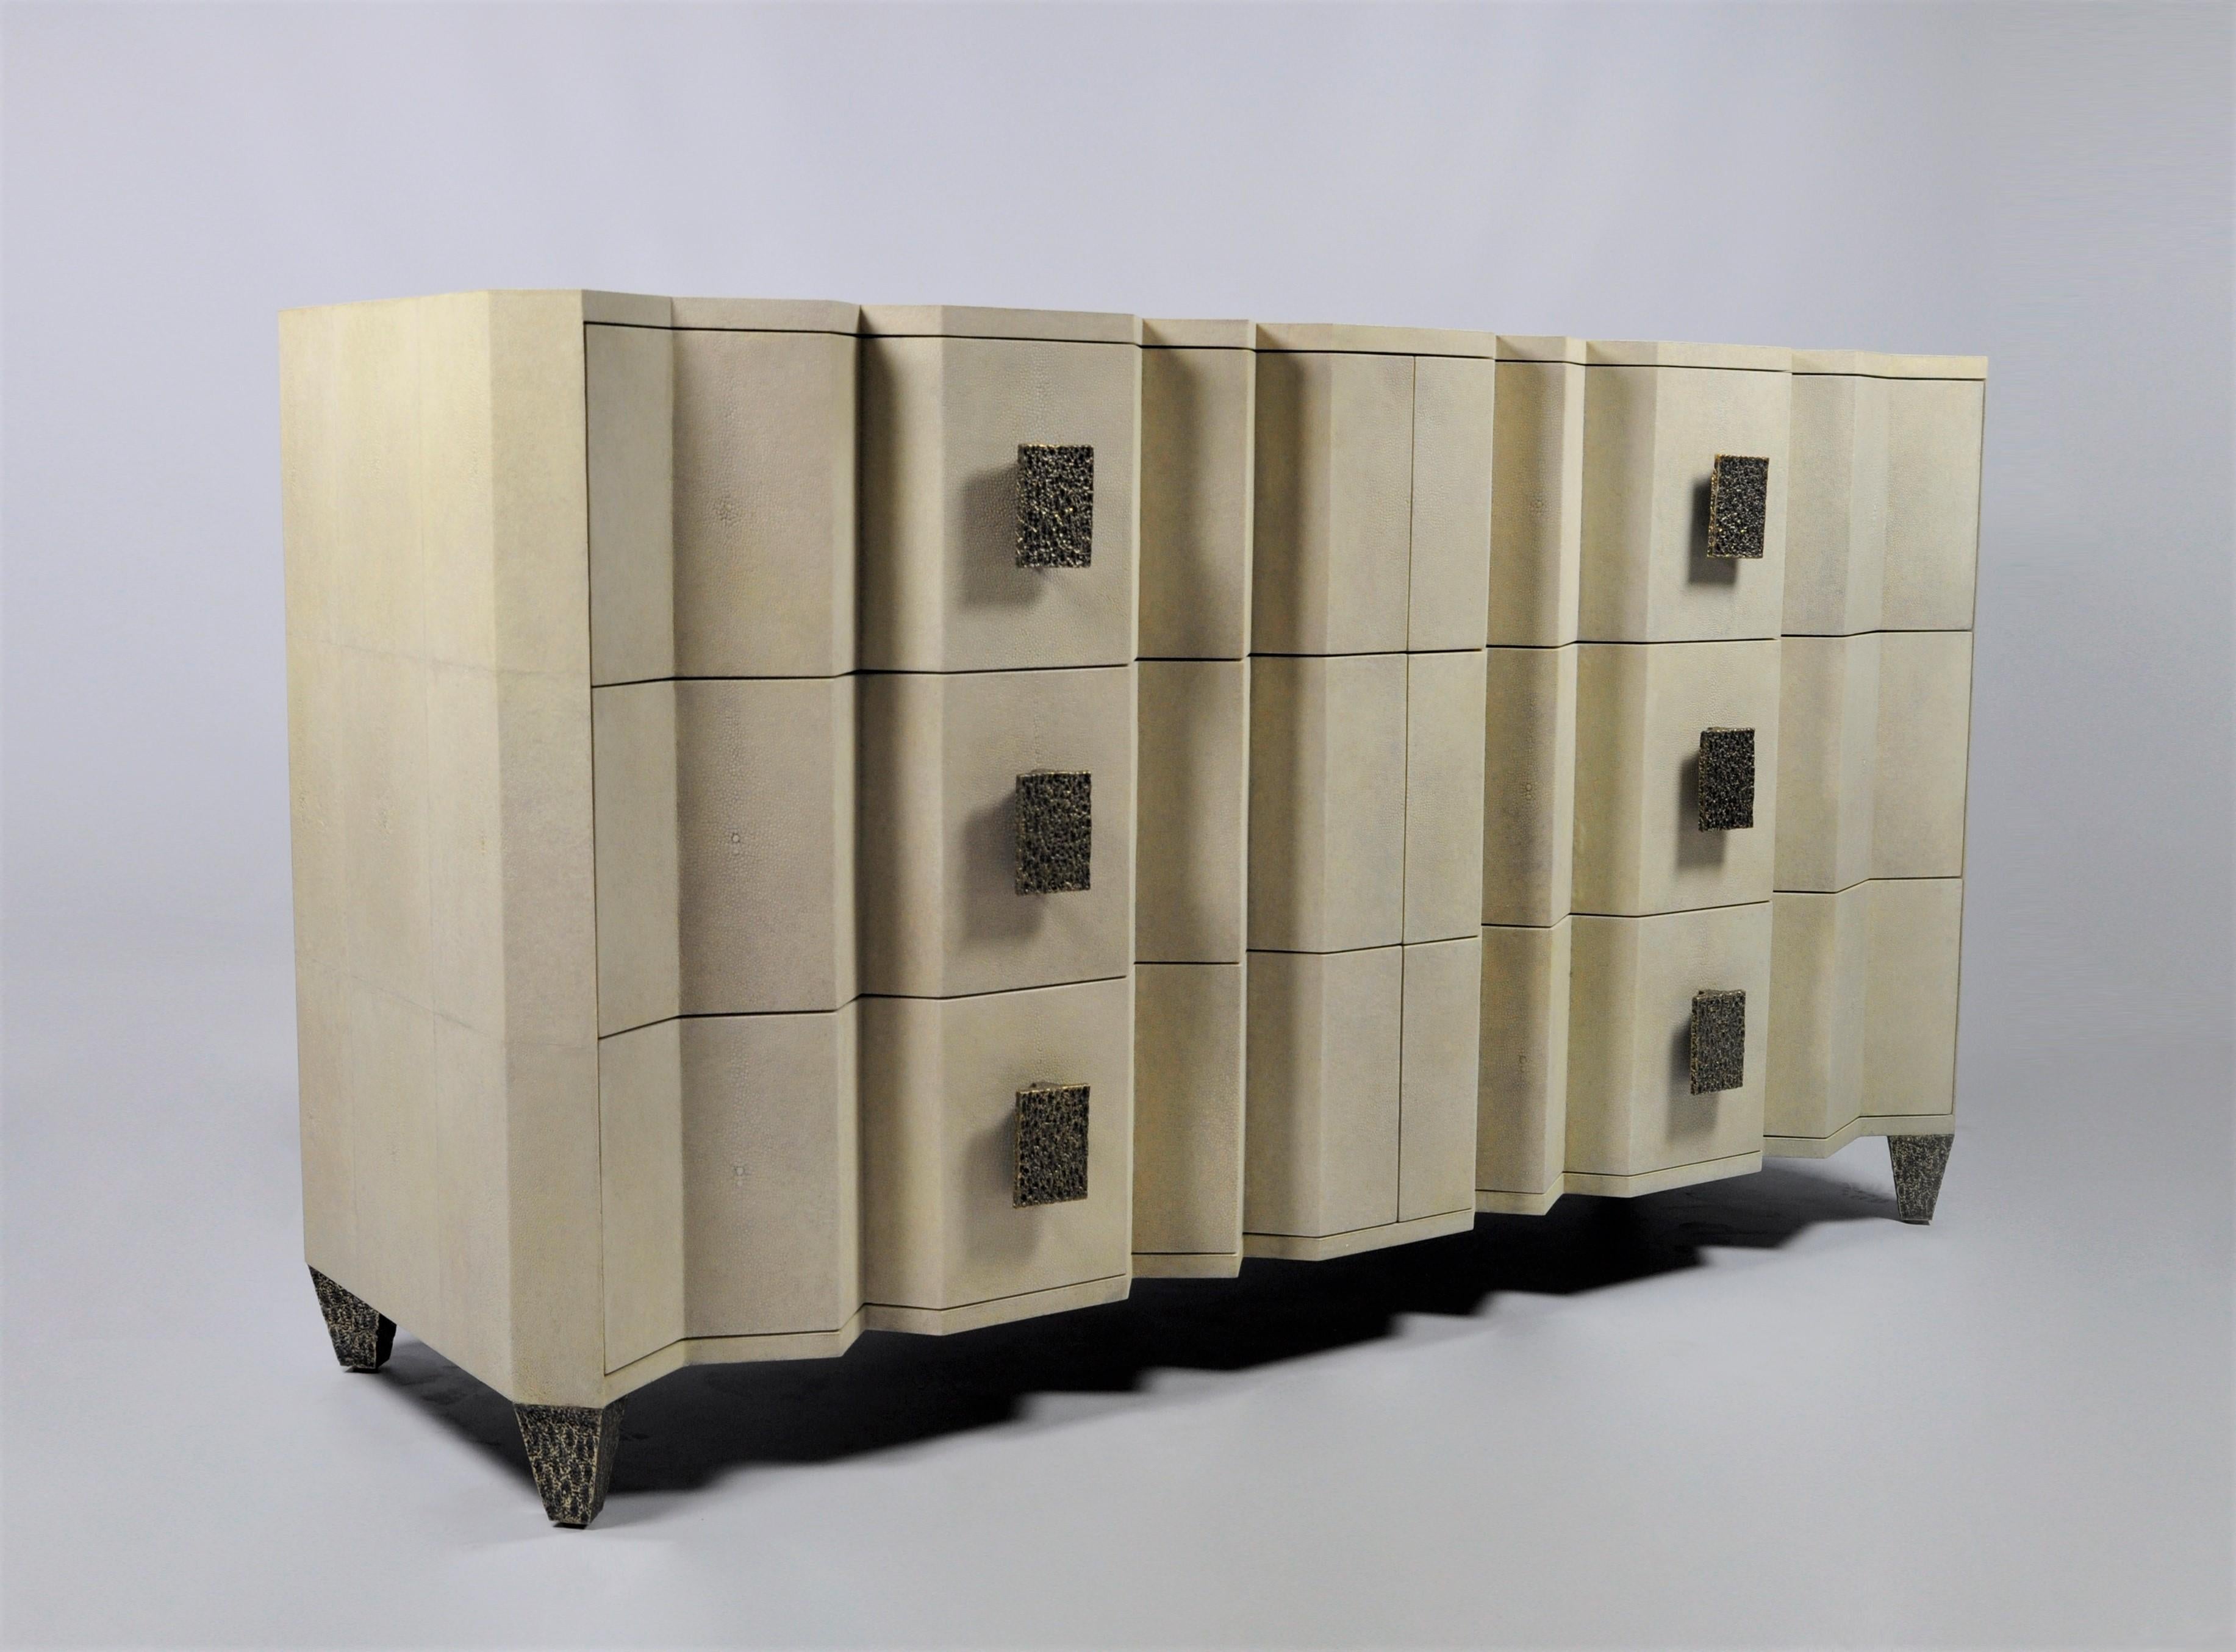 The Accordeon dresser is a stunning futurist piece made of shagreen. It has six drawers.
The handles and the feet are made in lost wax cast brass with a bronze patina.
The interior of the drawers are in black veneer.

The dimensions of this dresser